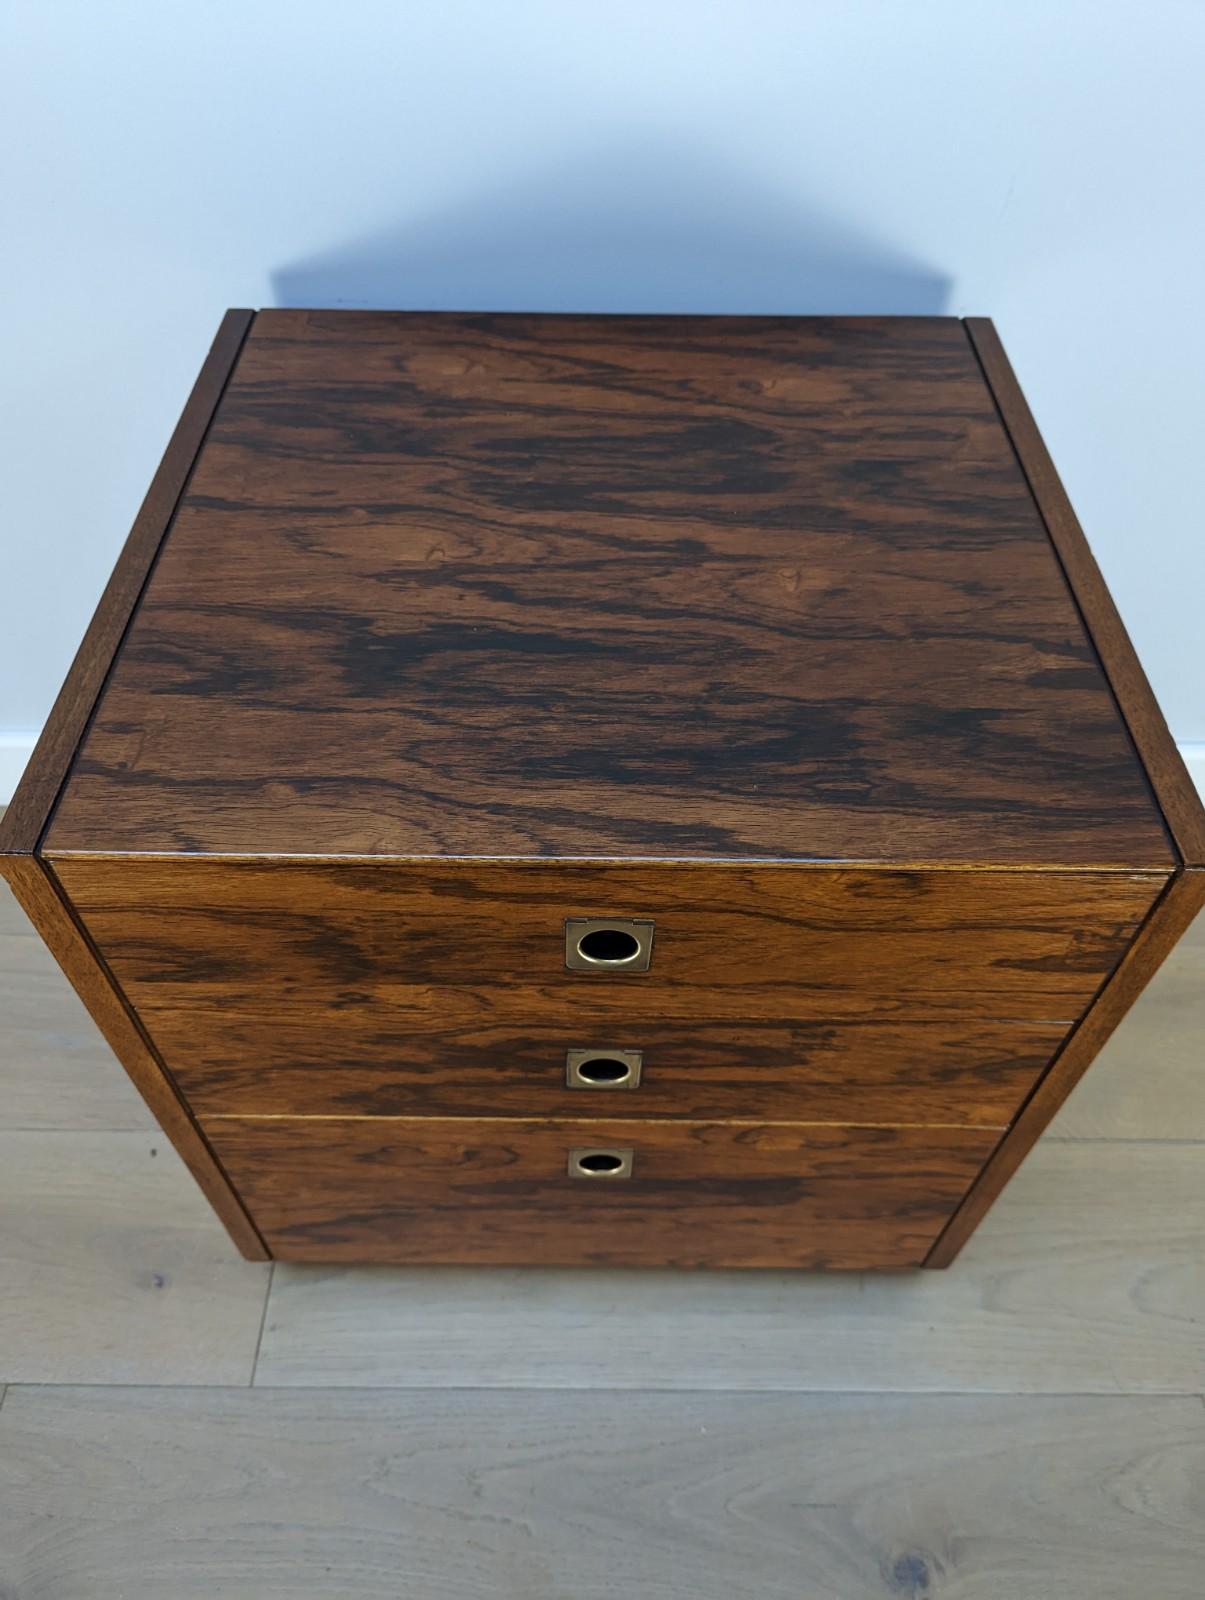 A stunning Robert Heritage for Heals of London rosewood chest of drawers/bedside cabinet

Brazilian Rosewood which has just been French polished to bring out the flare in the wood.

Made on the campaign style, this cabinet has 3 drawer drawers with